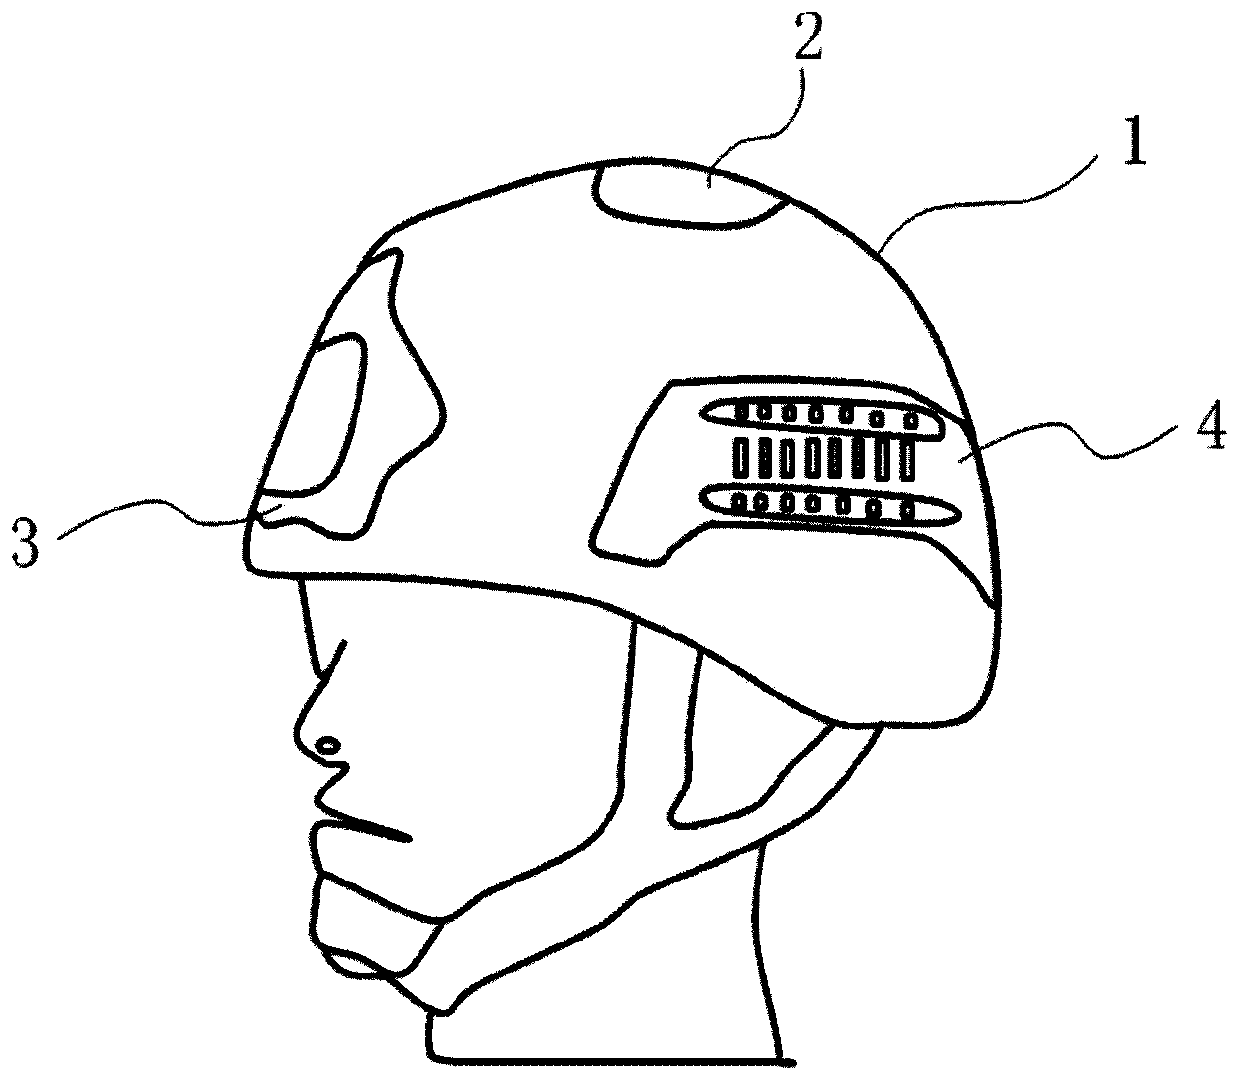 Tactical command map drawing and positioning system and helmet